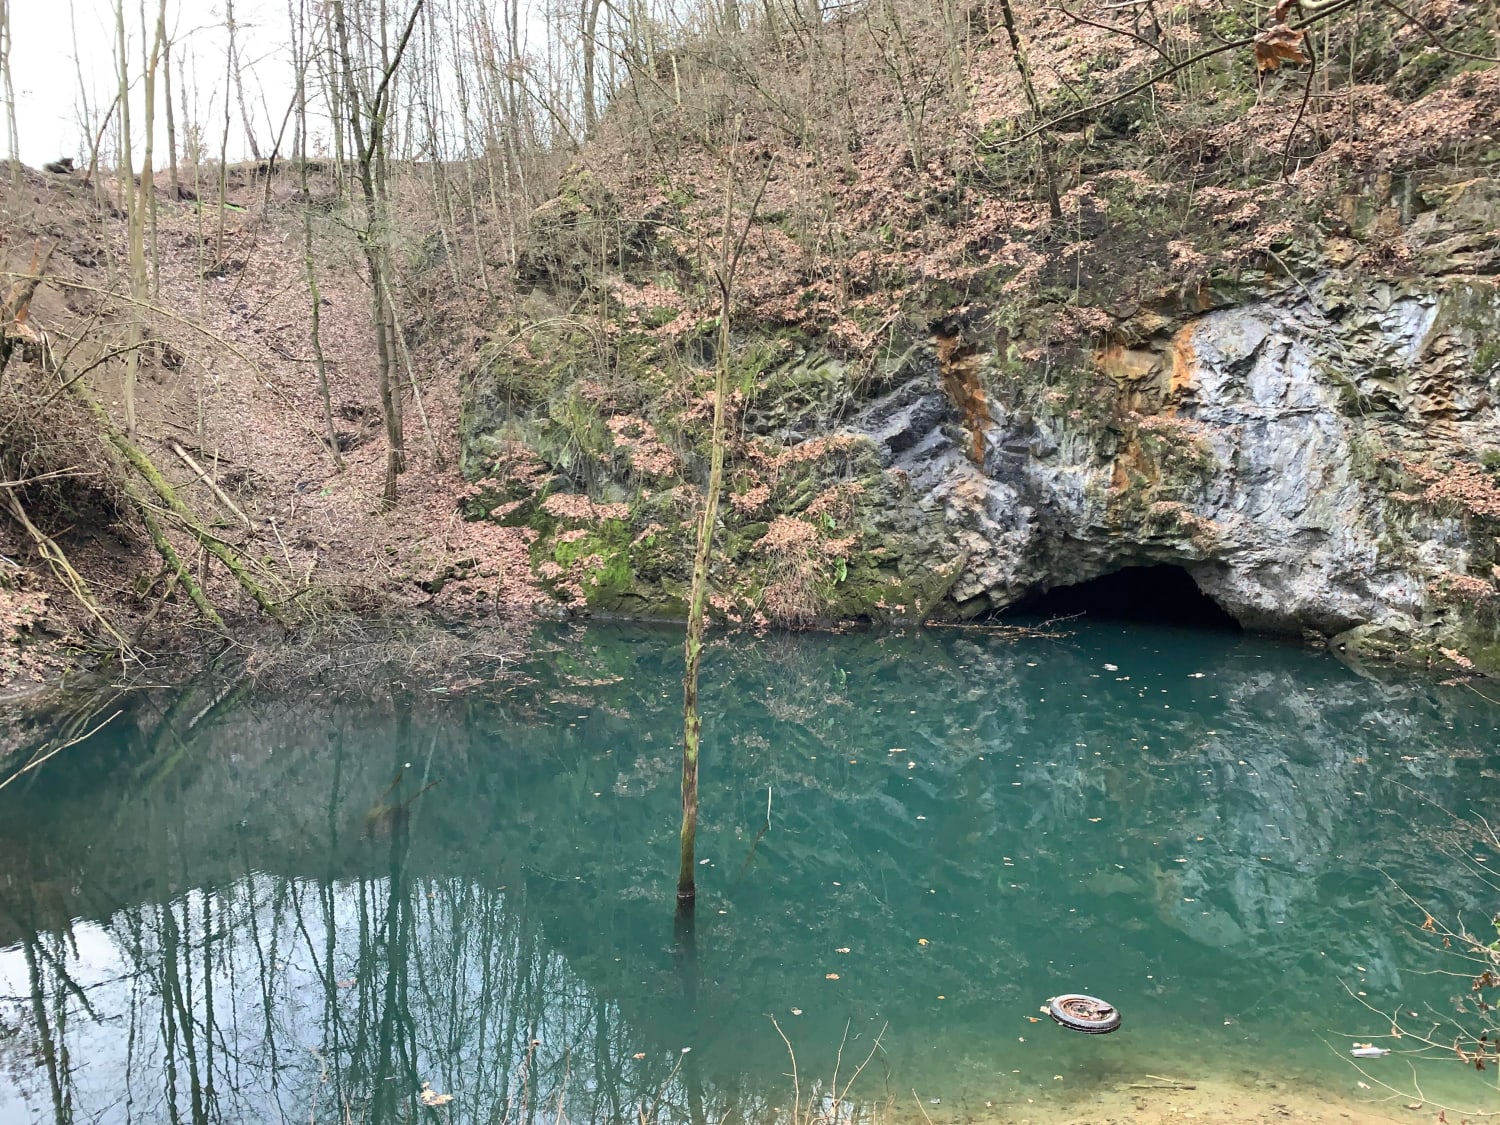 An Abandoned lime quarry/mine in Saxony, Germany that I visited Yesterday (It has 4 levels below the one that is visible just above the water line)